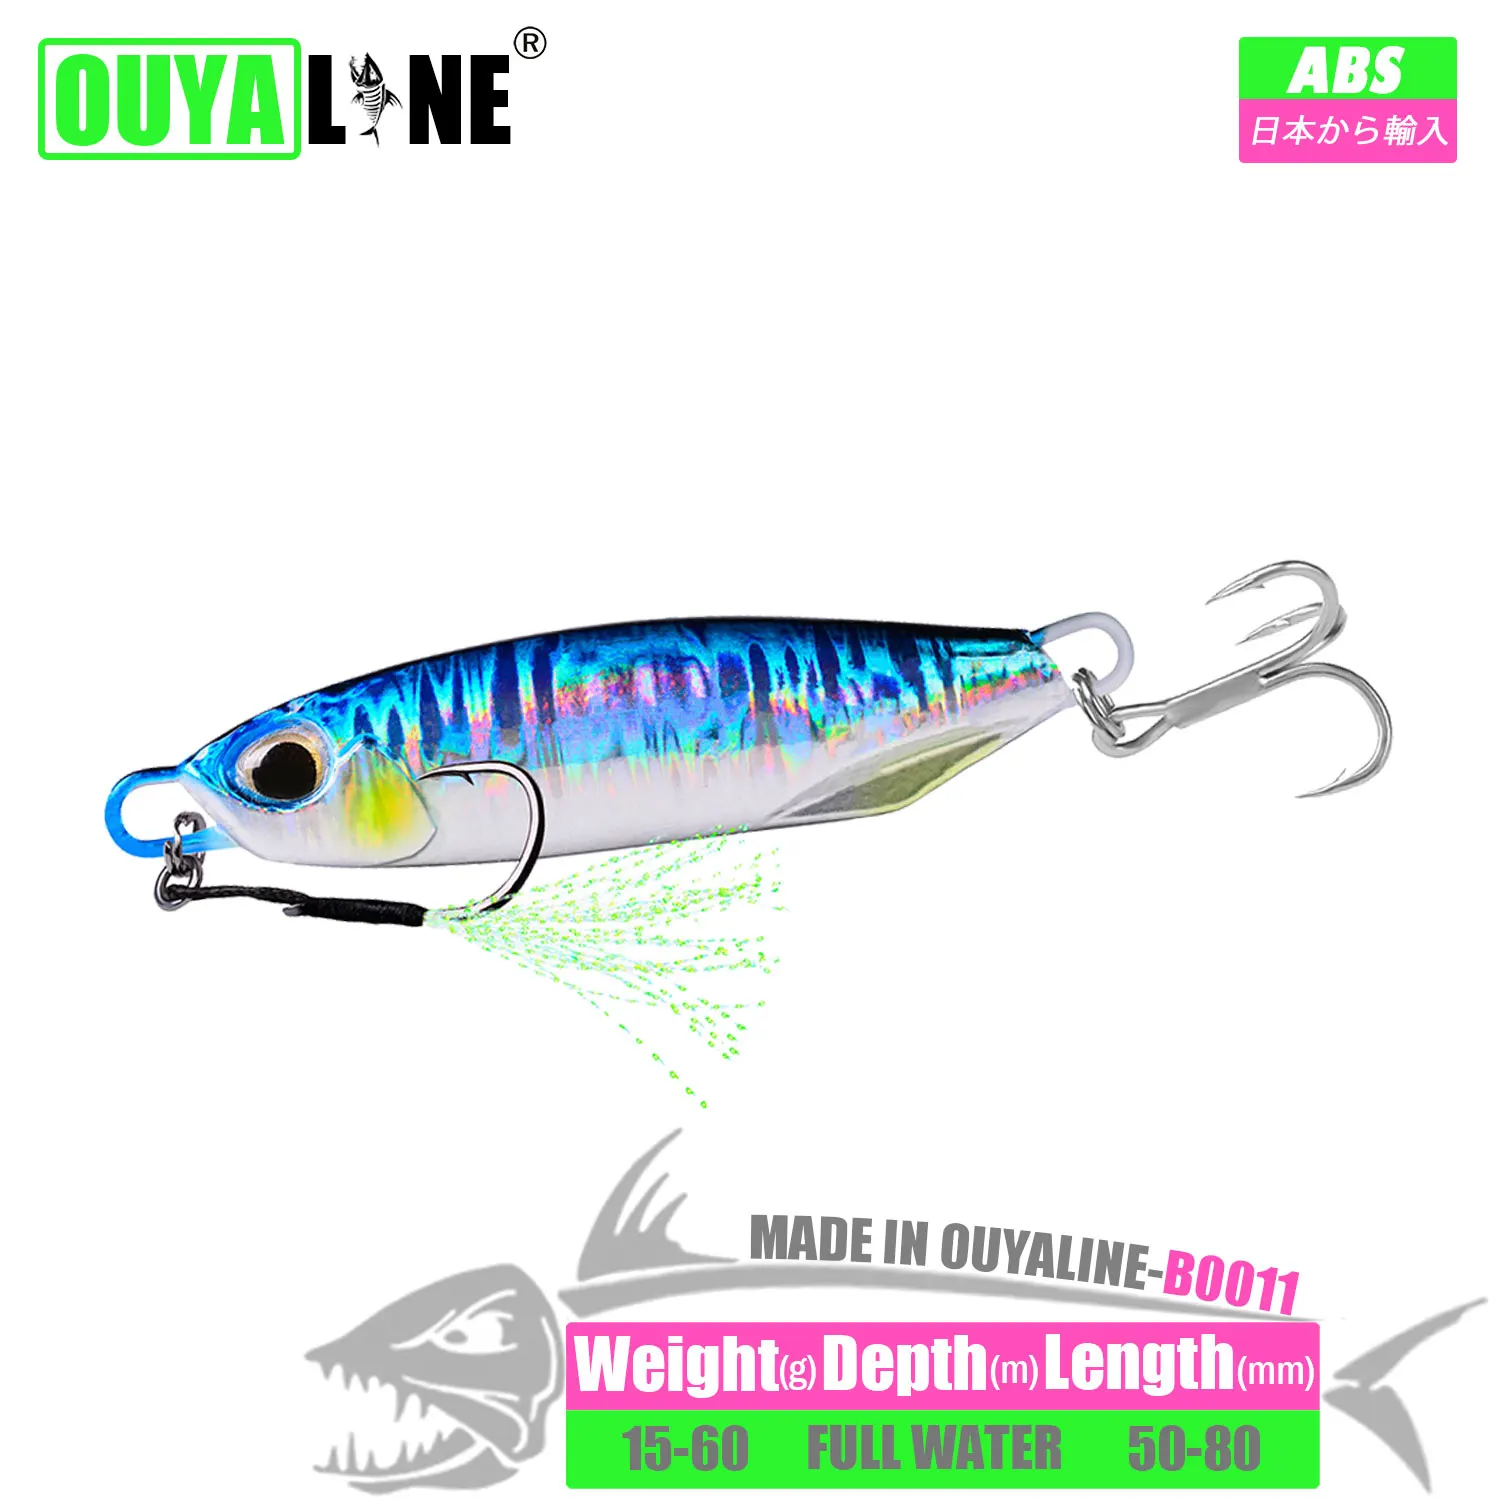 

Metal Jig Fishing Lure 15g 20g 30g 40g 60g Sinking Isca Artificial Trolling Hard Baits Bass Tackle Trout Jigging Saltwater Pike